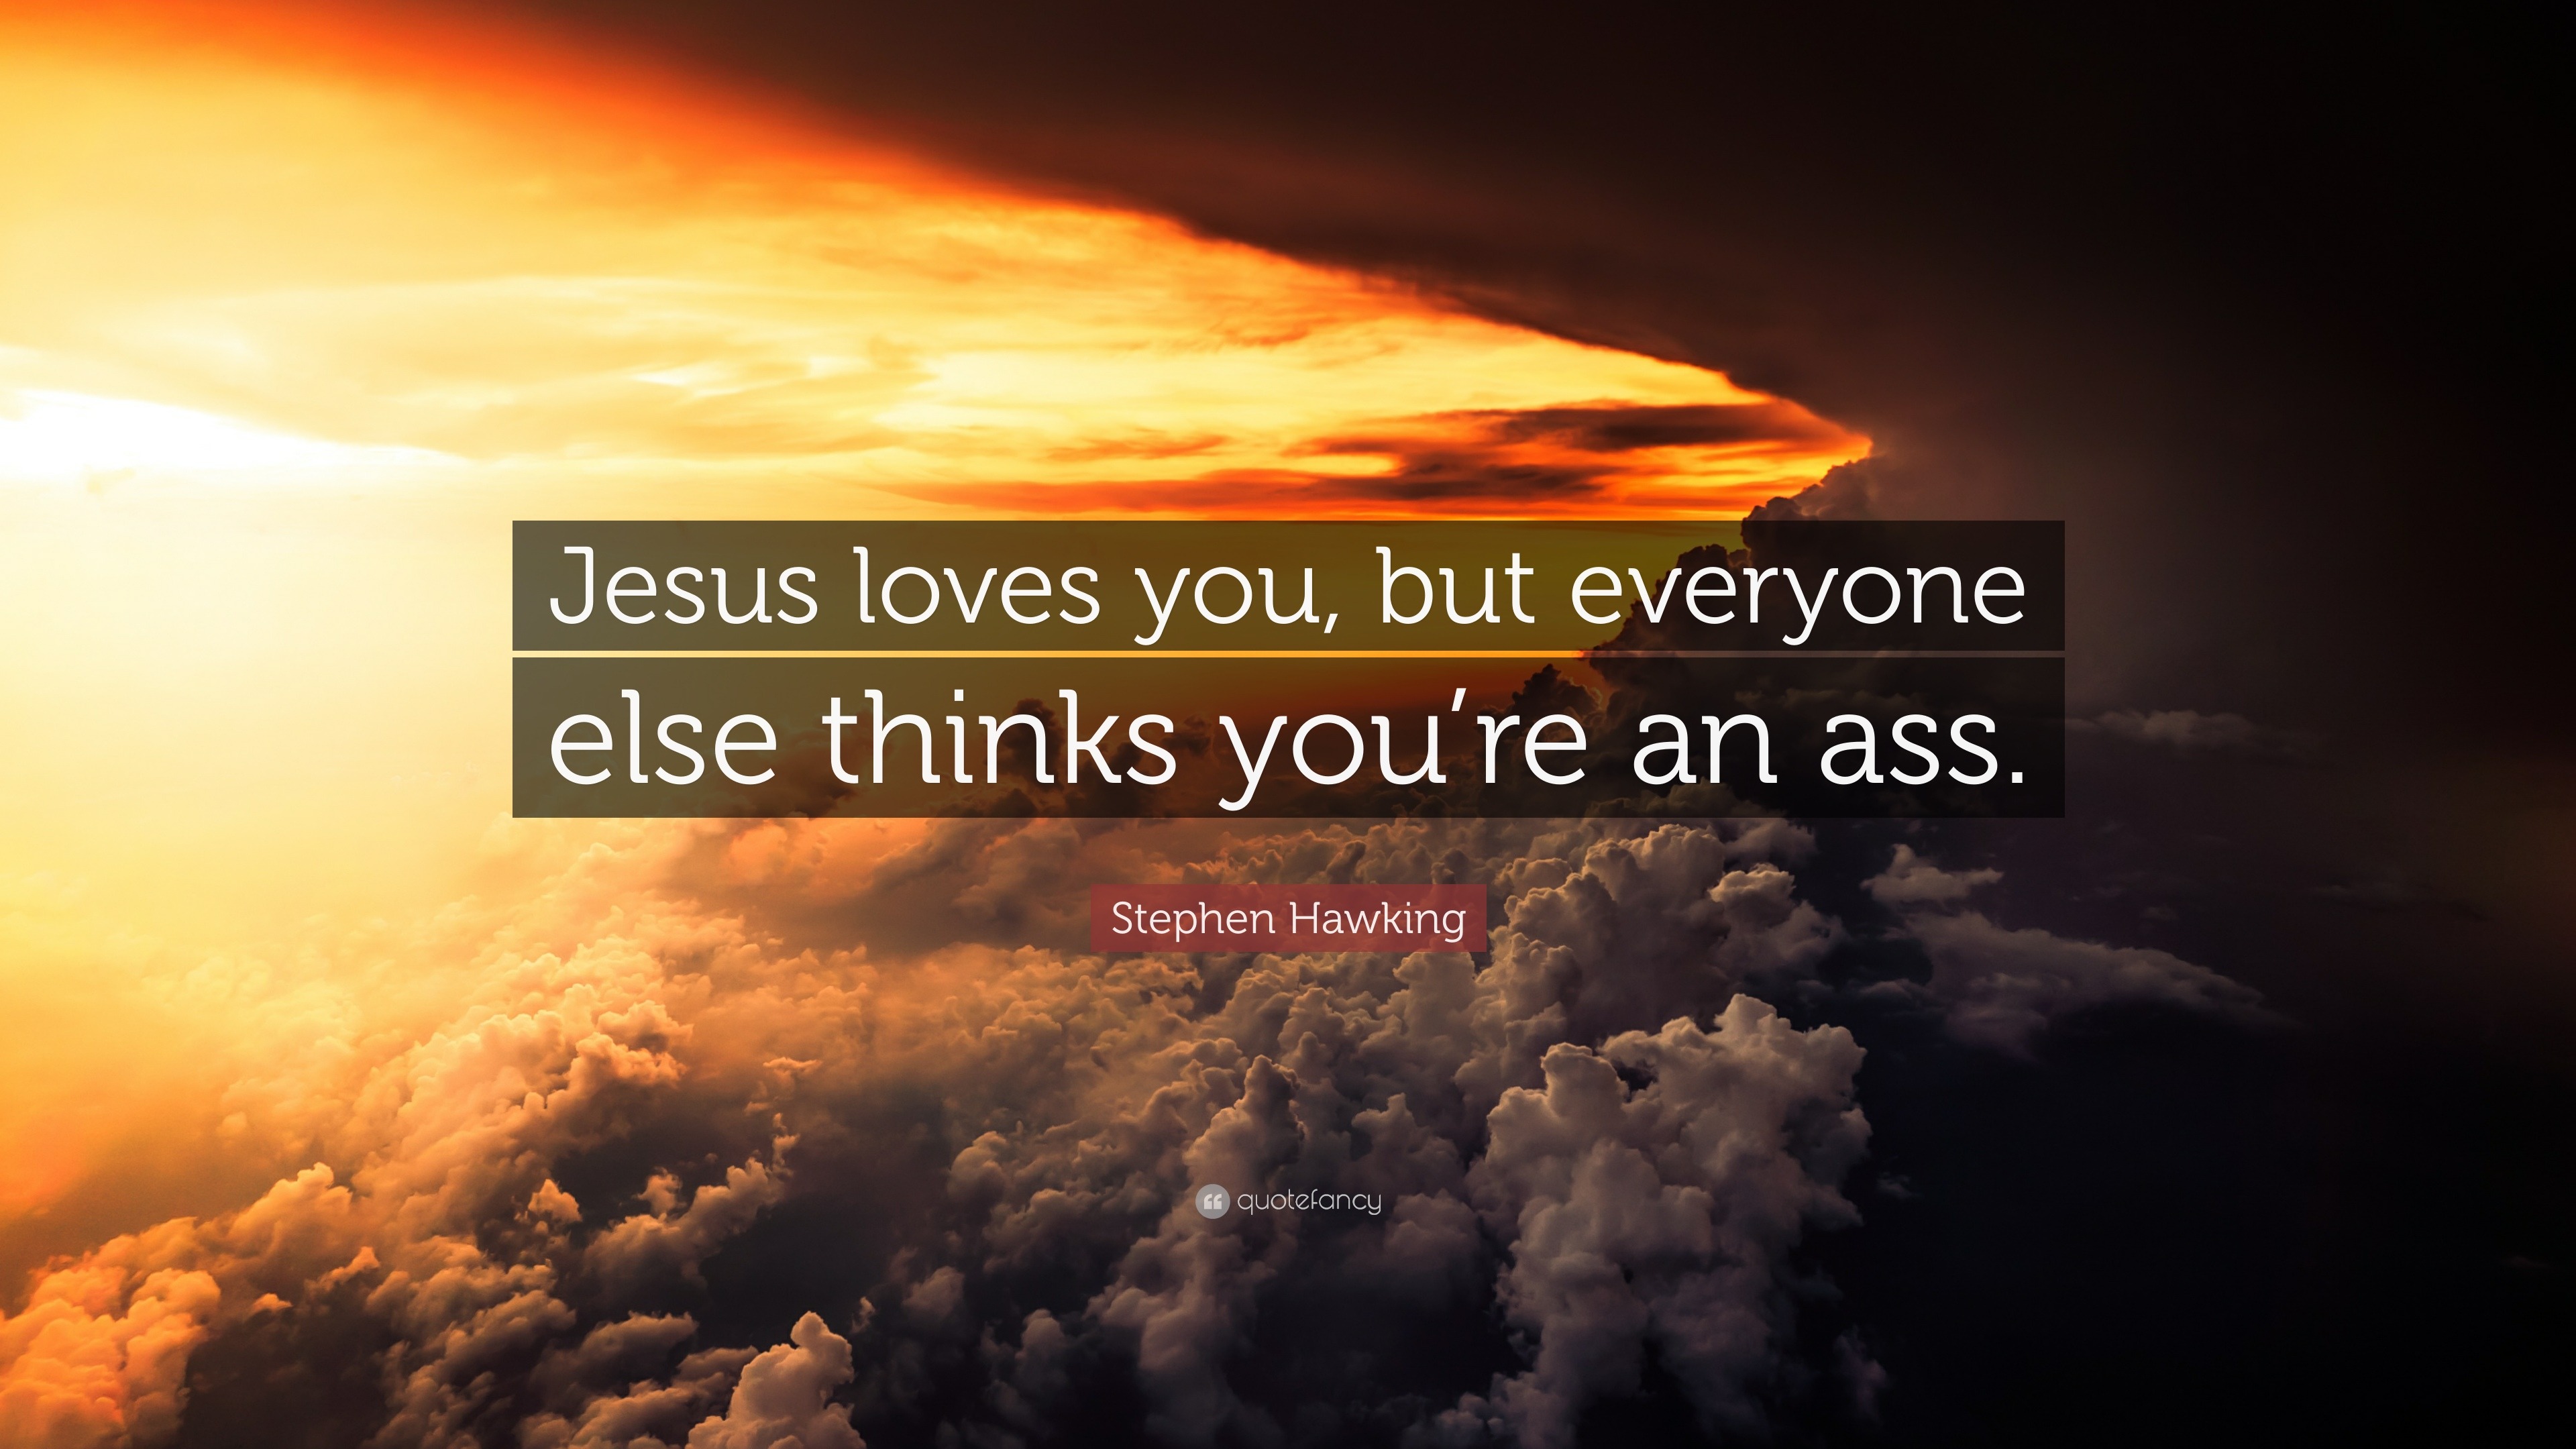 Stephen Hawking Quote: “Jesus loves you, but everyone else thinks you're an  ass.”